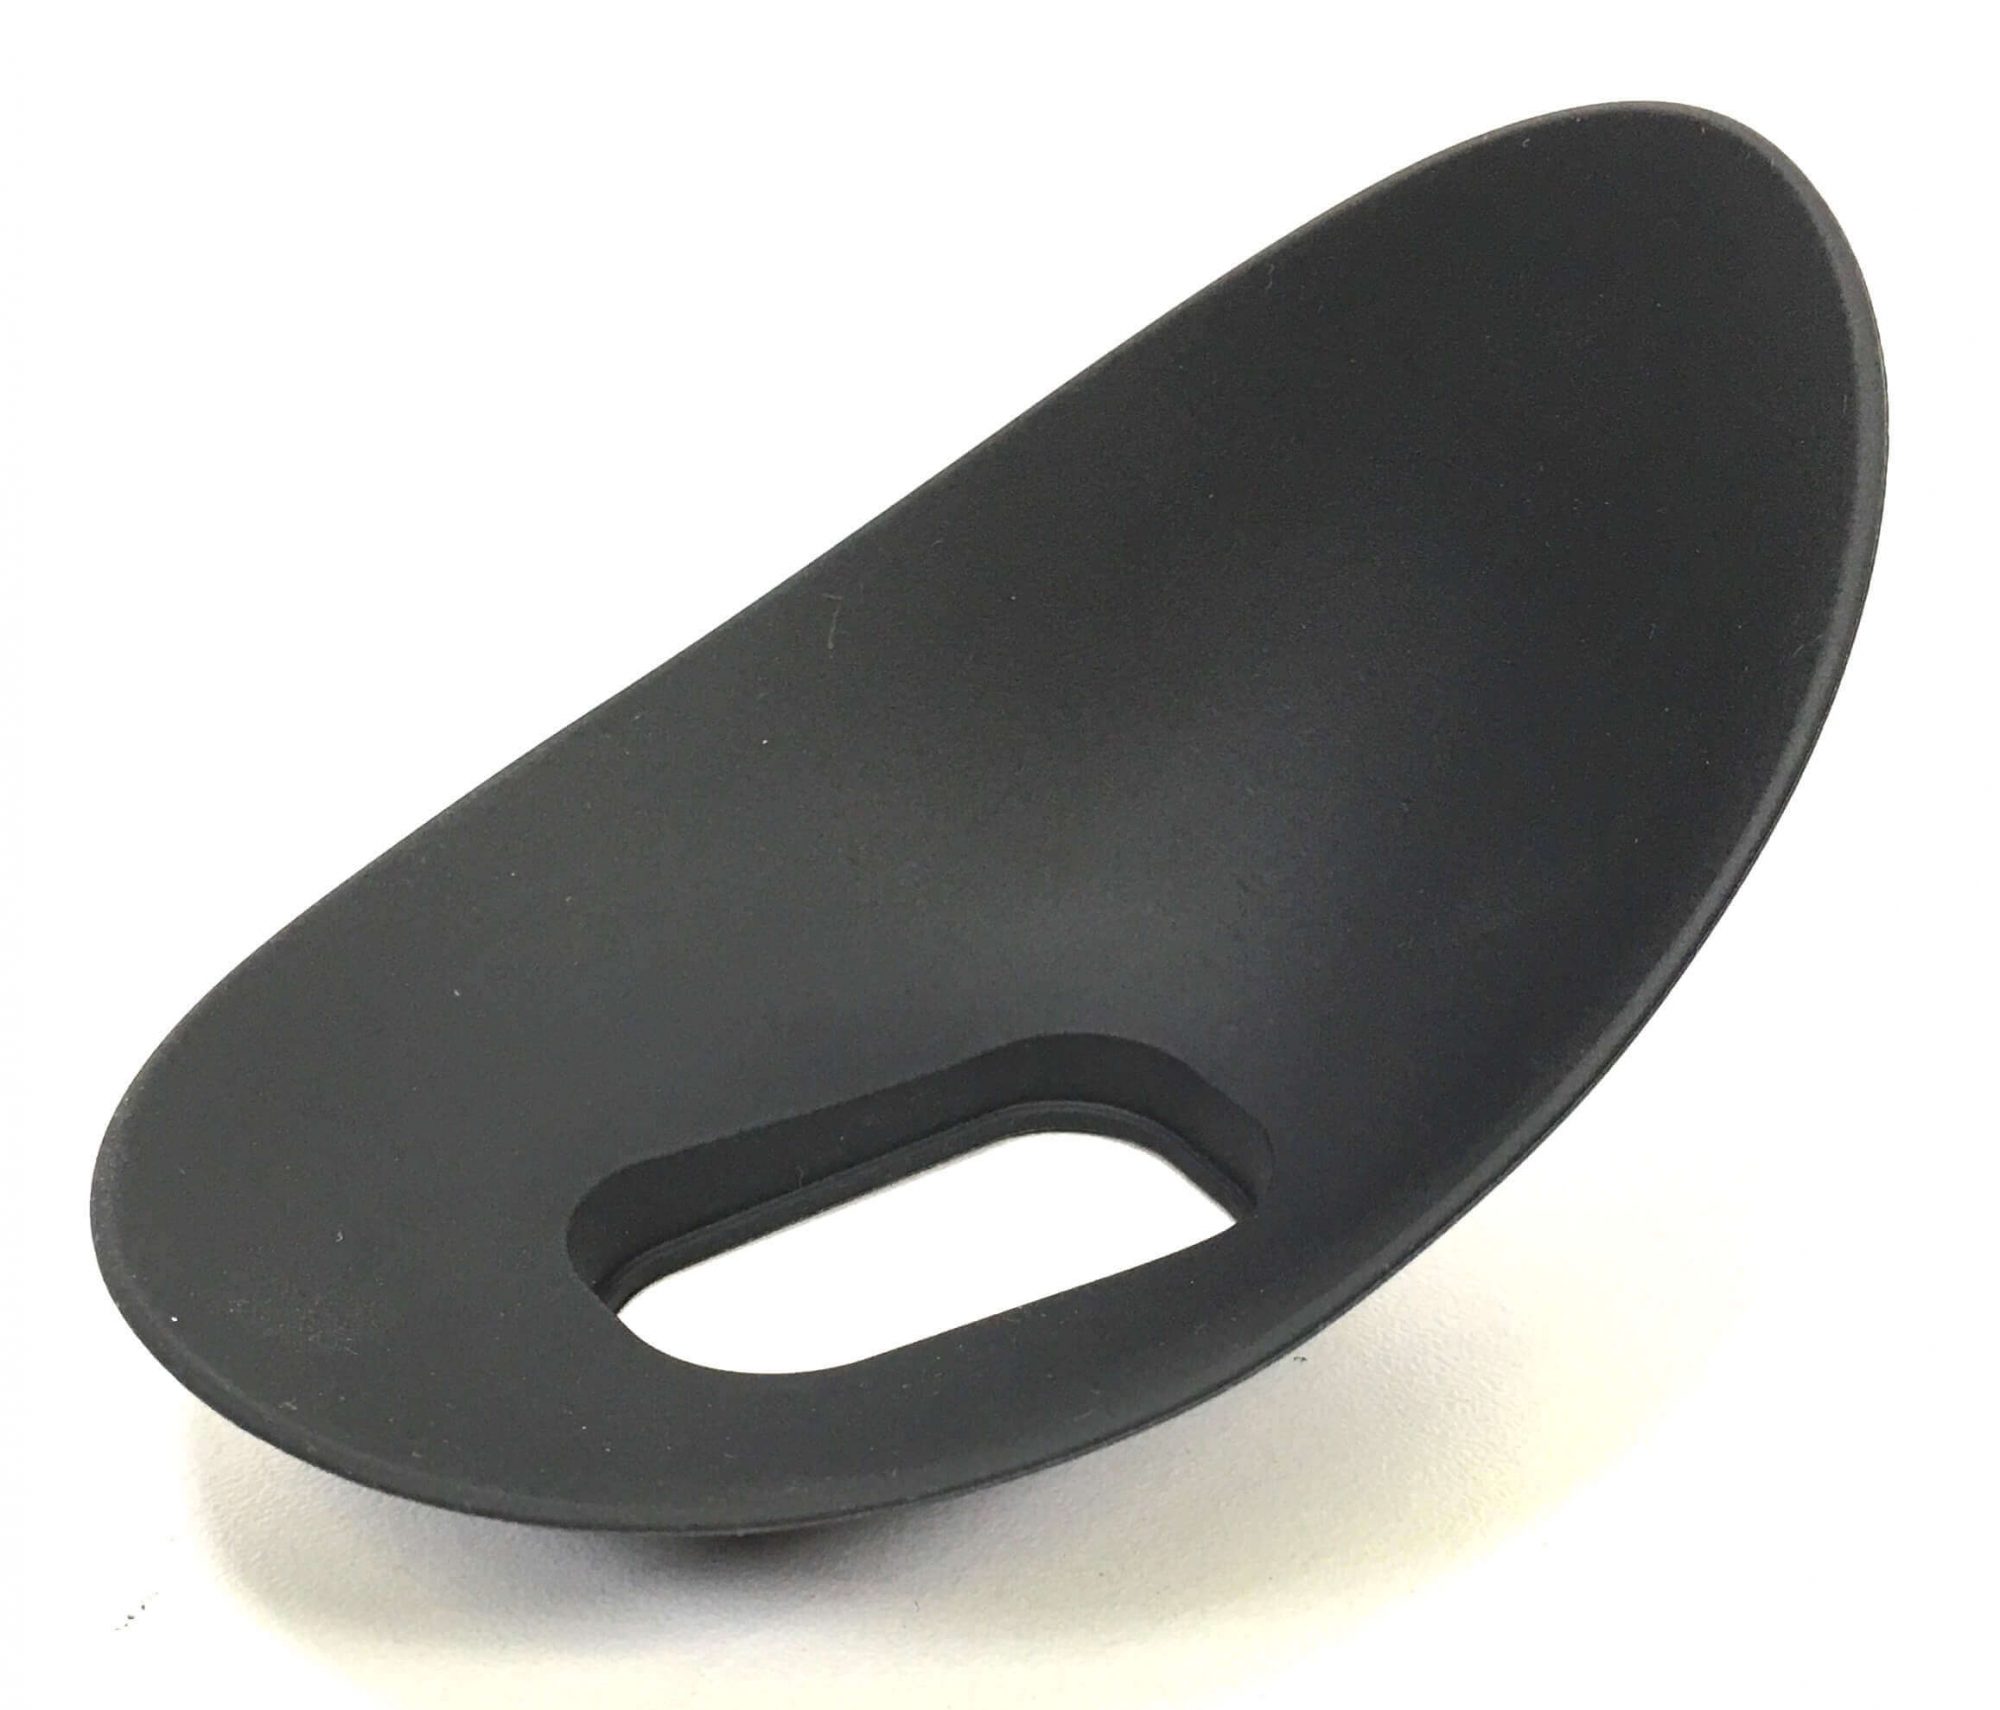 Original large eyecup that fits over the rubber eyepiece on the camcorder of the Sony HDR-CX900 camcorder. It is a genuine Sony part, sourced directly from Sony USA. Brand new factory fresh. Free Shipping.